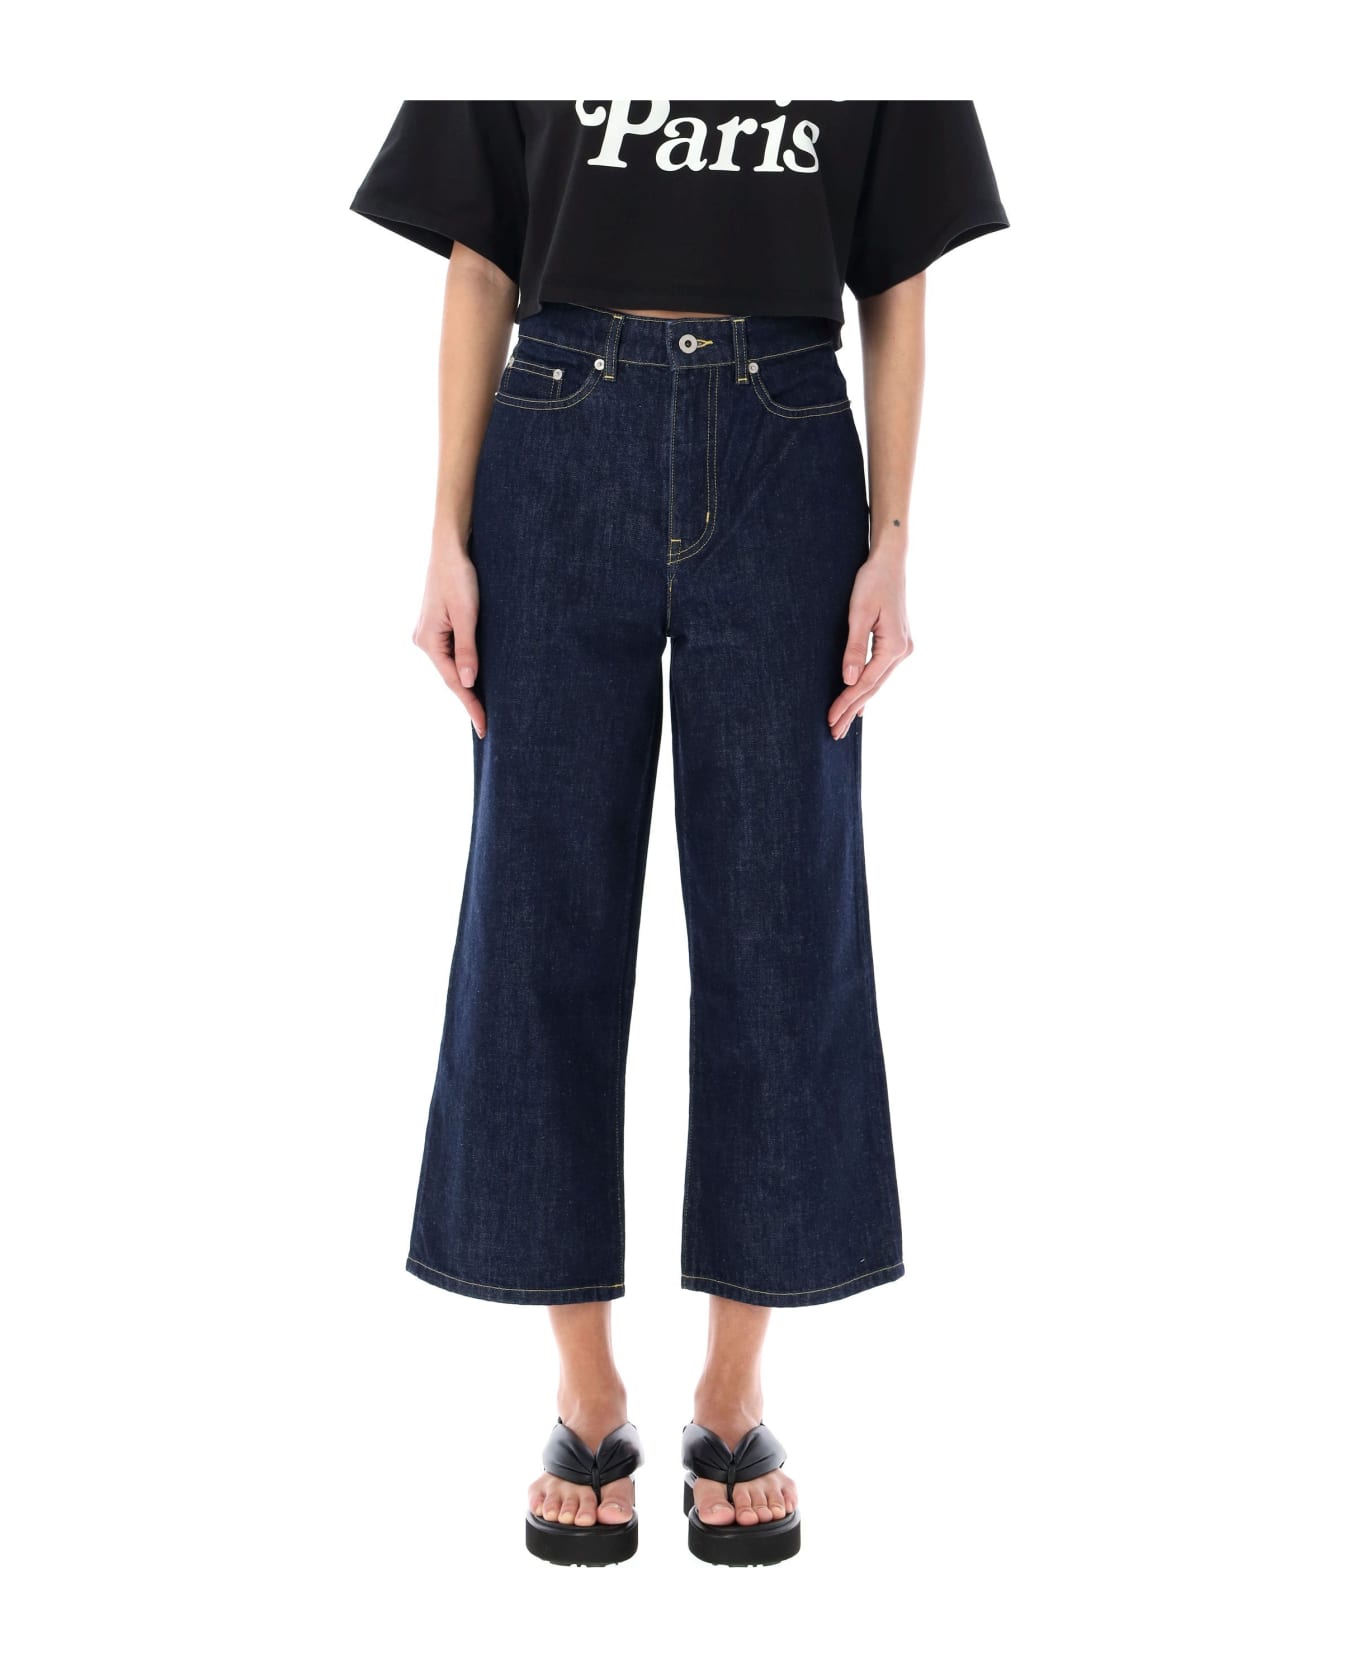 Kenzo Sumire Cropped Jeans - RINSED BLUE DENIN